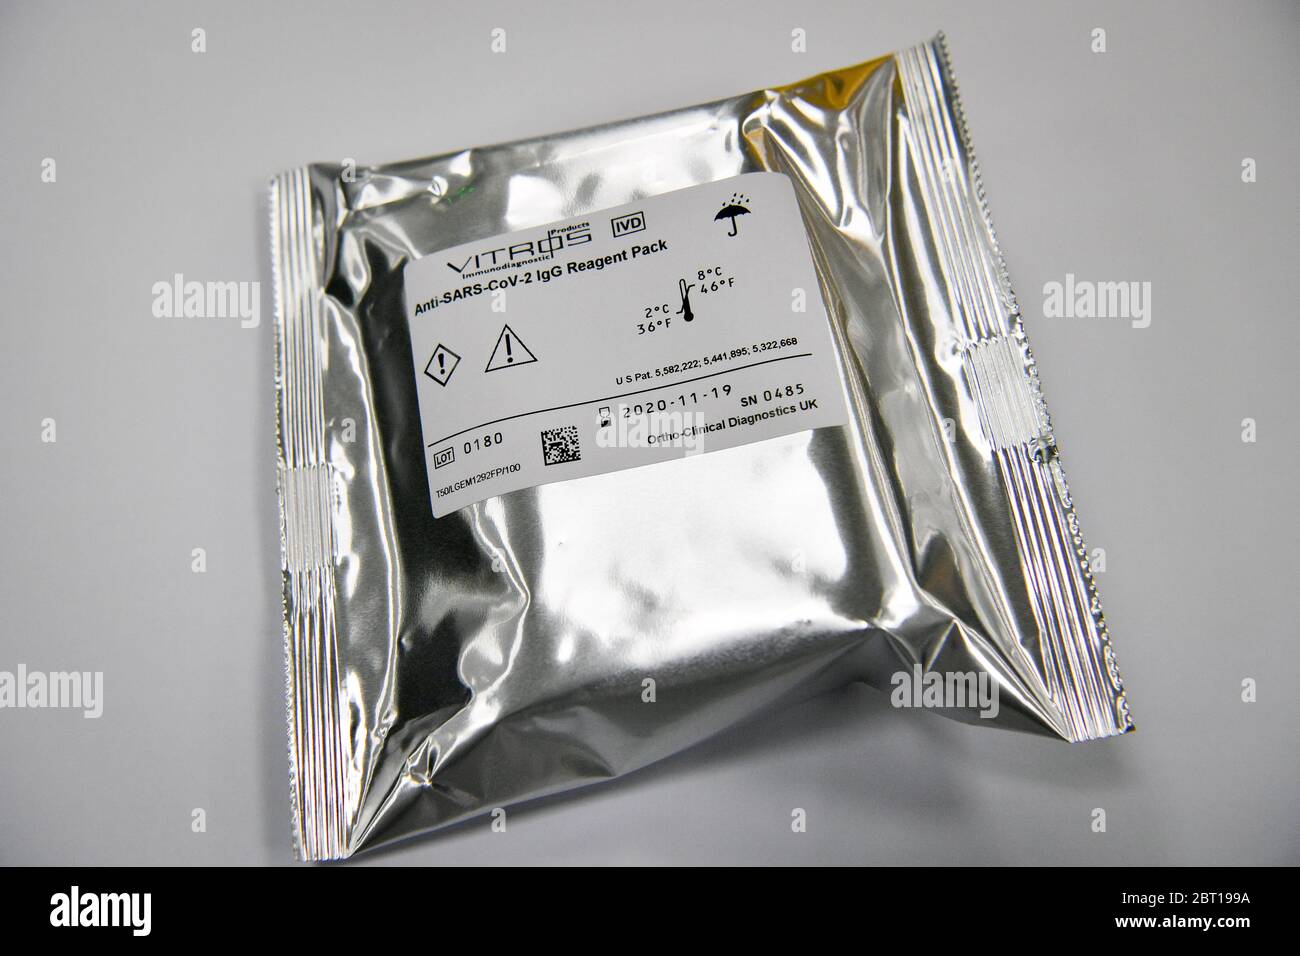 A covid-19 antibody testing kit at wrapped in sealed foil comes off the production line at the Ortho Clinical Diagnostics (OCD) testing laboratory in Pencoed in Wales. Stock Photo